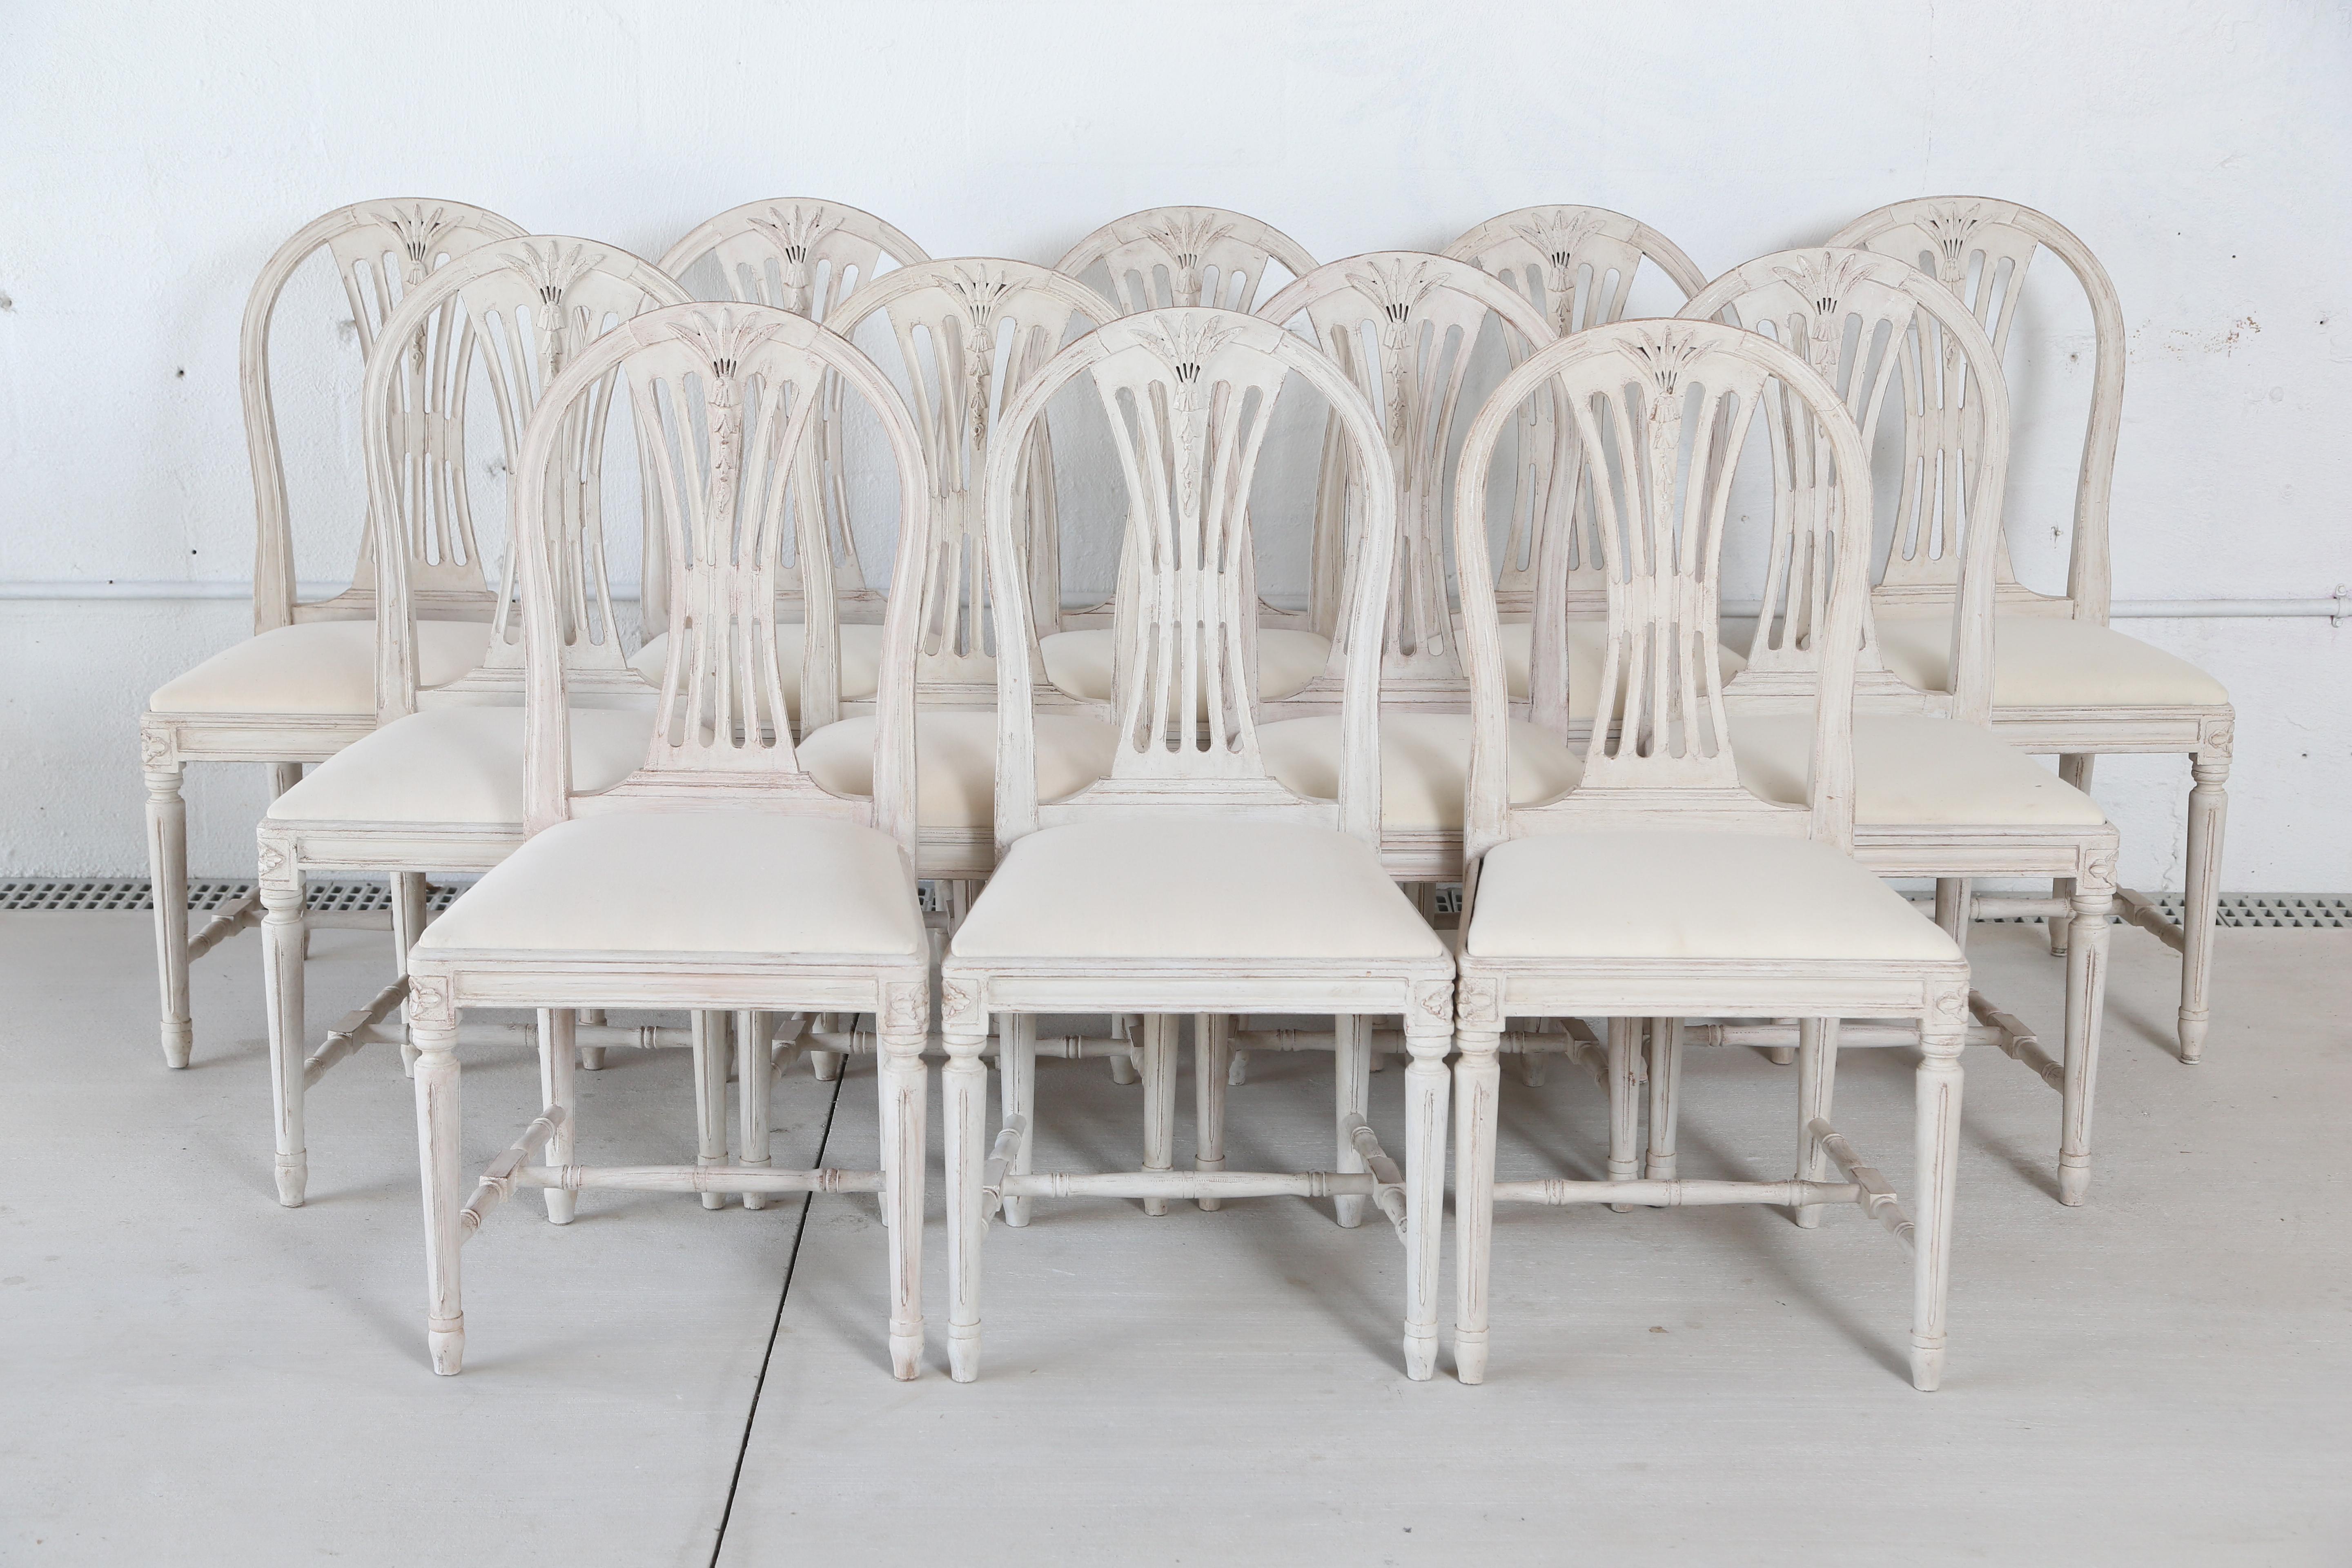 Set of 12 antique Swedish painted Gustavian style dining chairs, each with arched backs carved with wheat and bell flowers, openwork spelt, square drop-in seats, round fluted legs, joined by H-shaped stretchers, and carved rosettes on top of seat